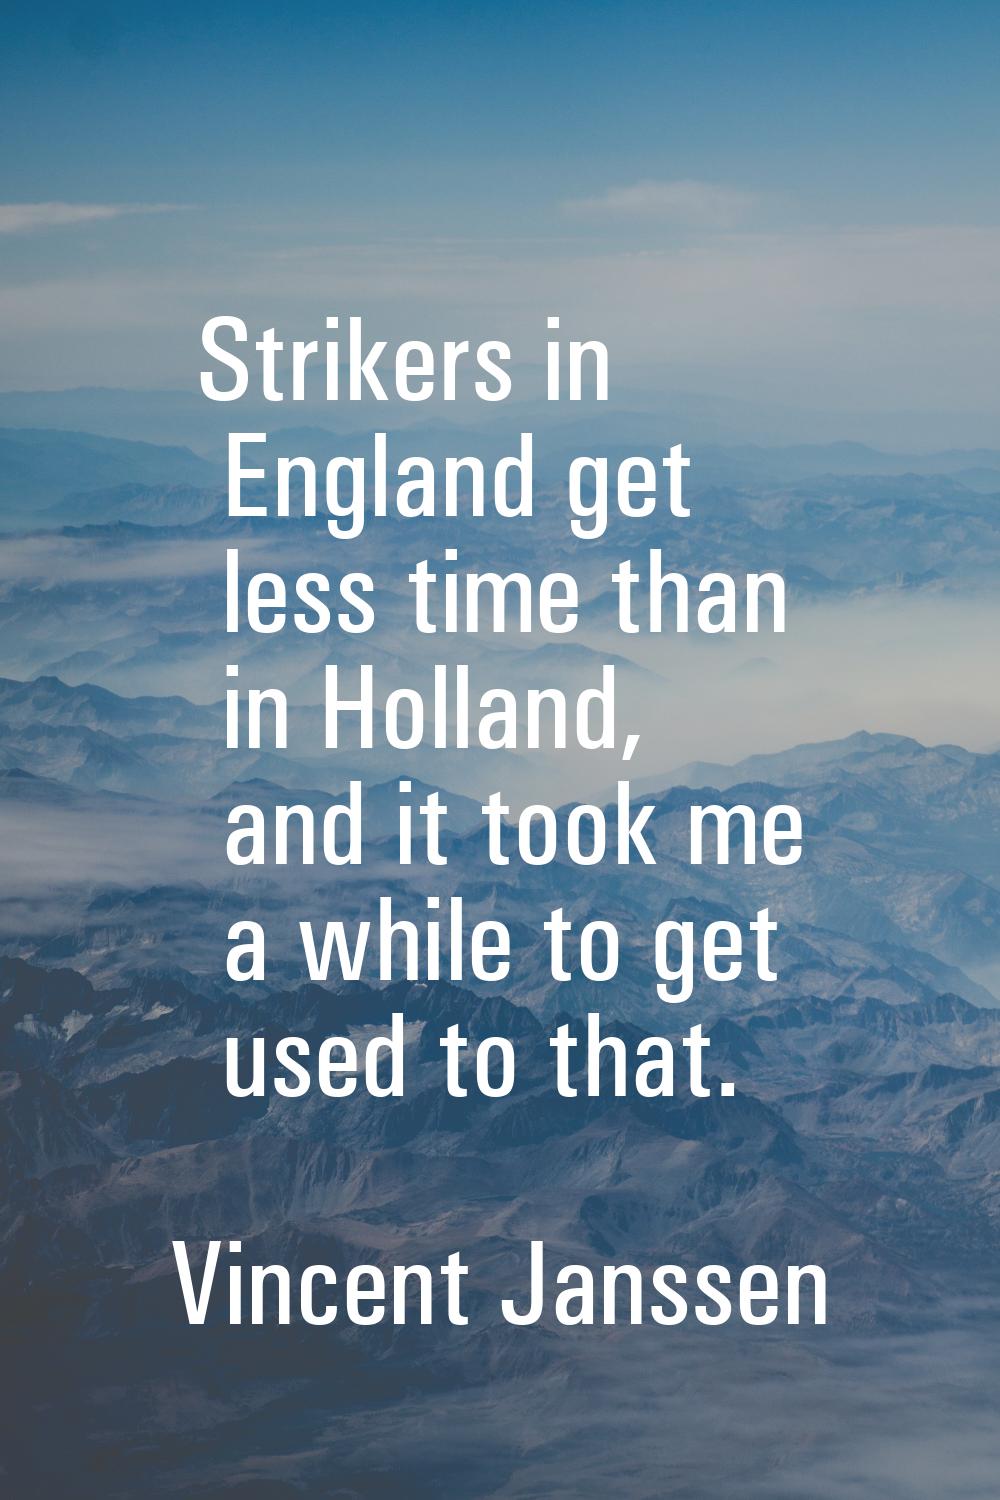 Strikers in England get less time than in Holland, and it took me a while to get used to that.